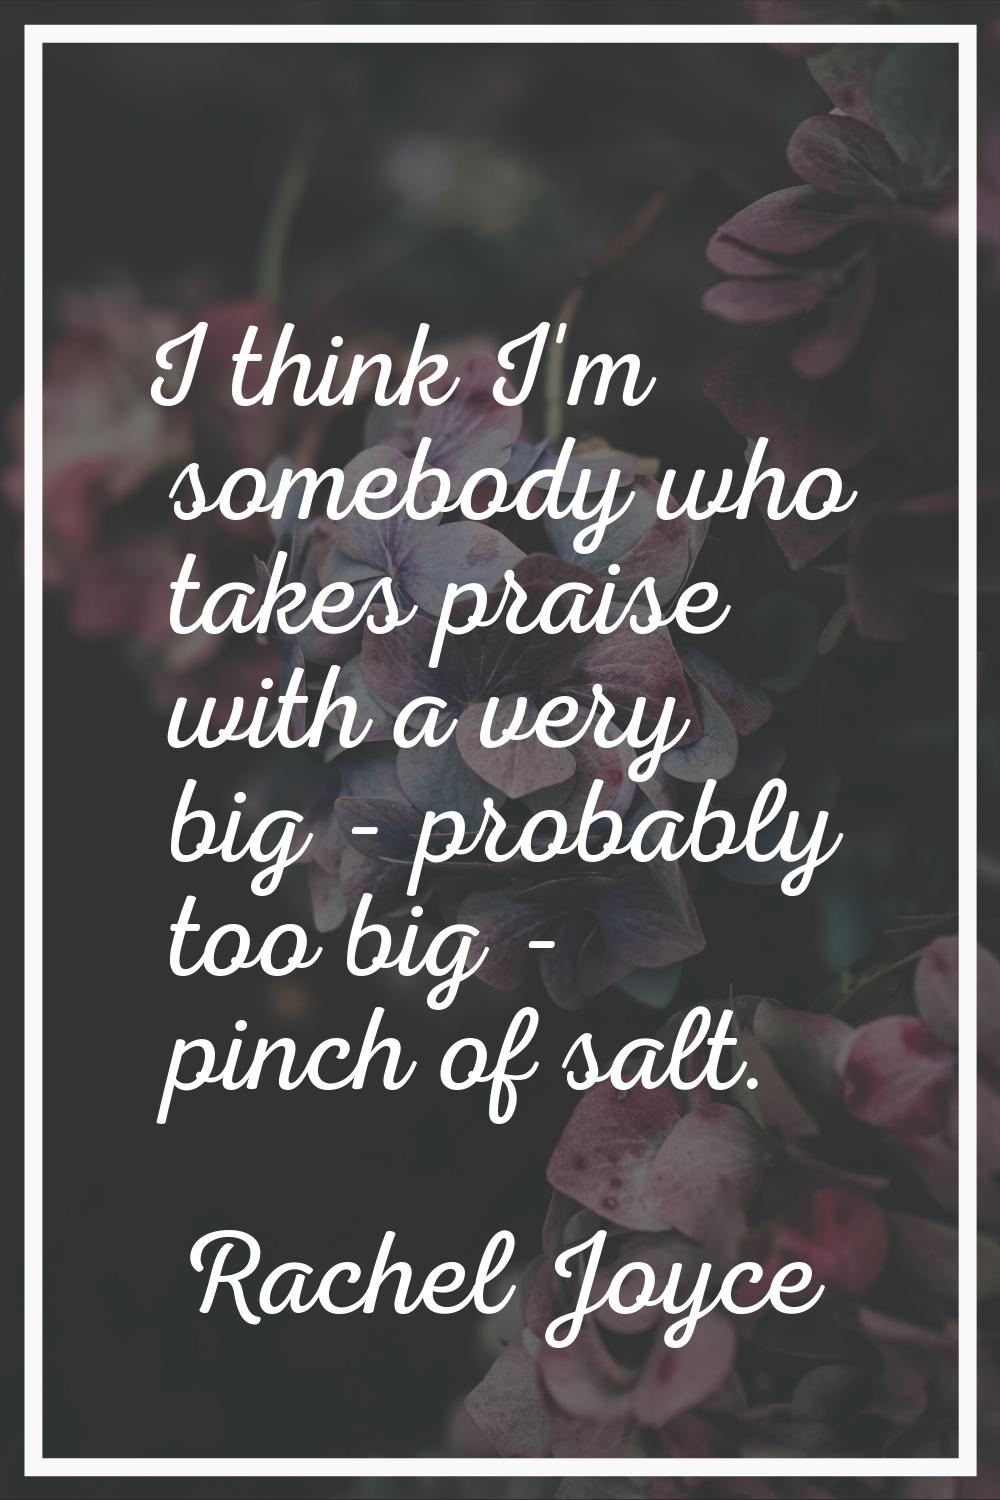 I think I'm somebody who takes praise with a very big - probably too big - pinch of salt.